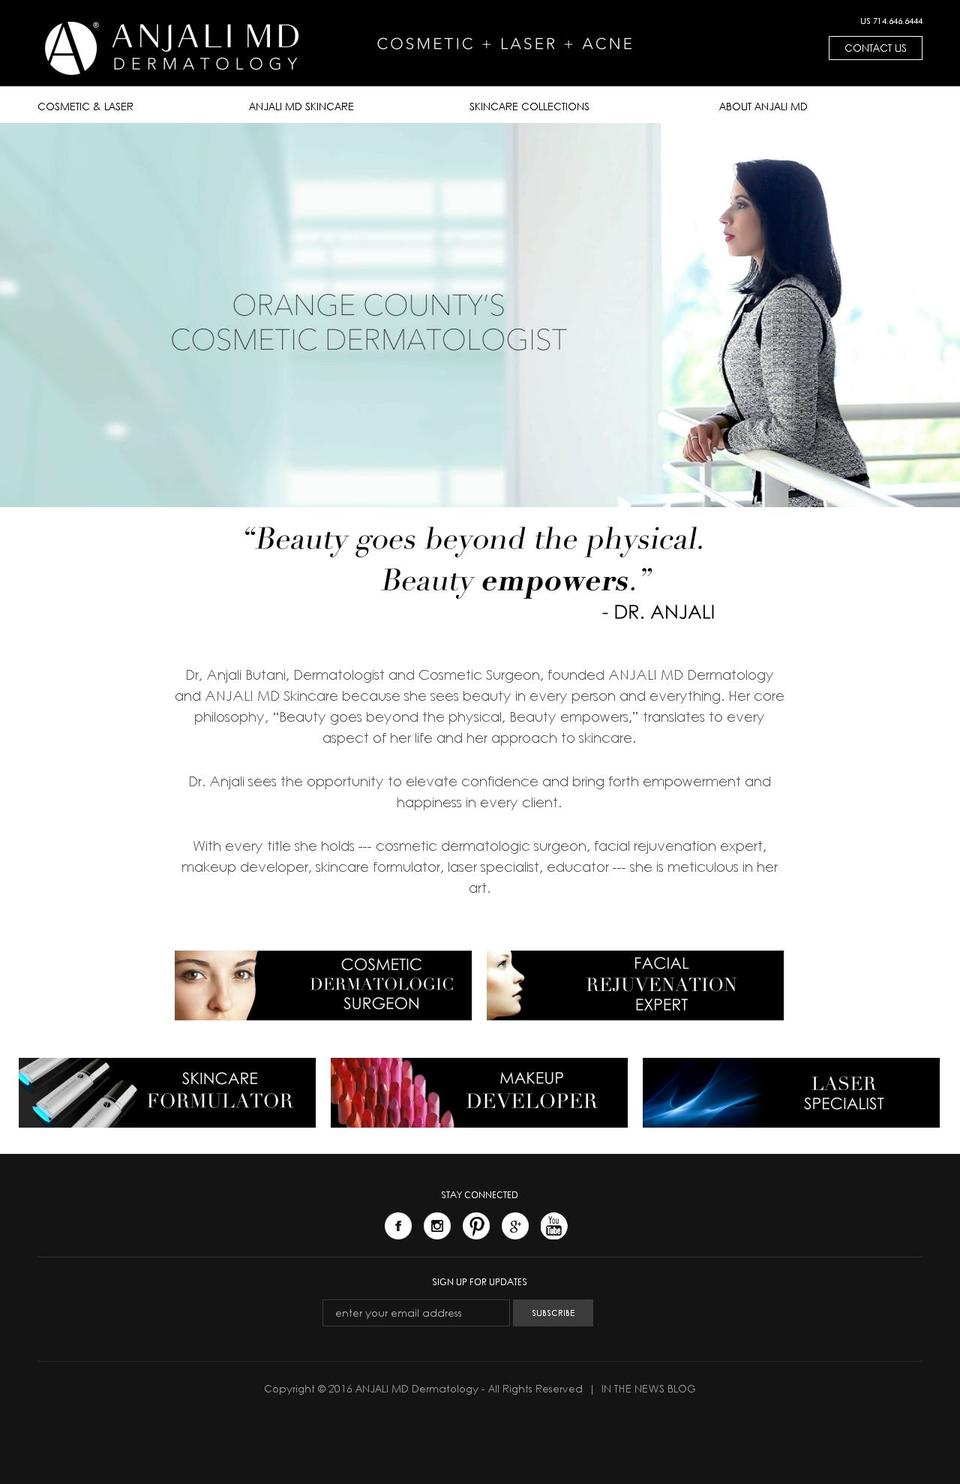 Anjali MD Site 2016 Shopify theme site example 844-oc-laser.org